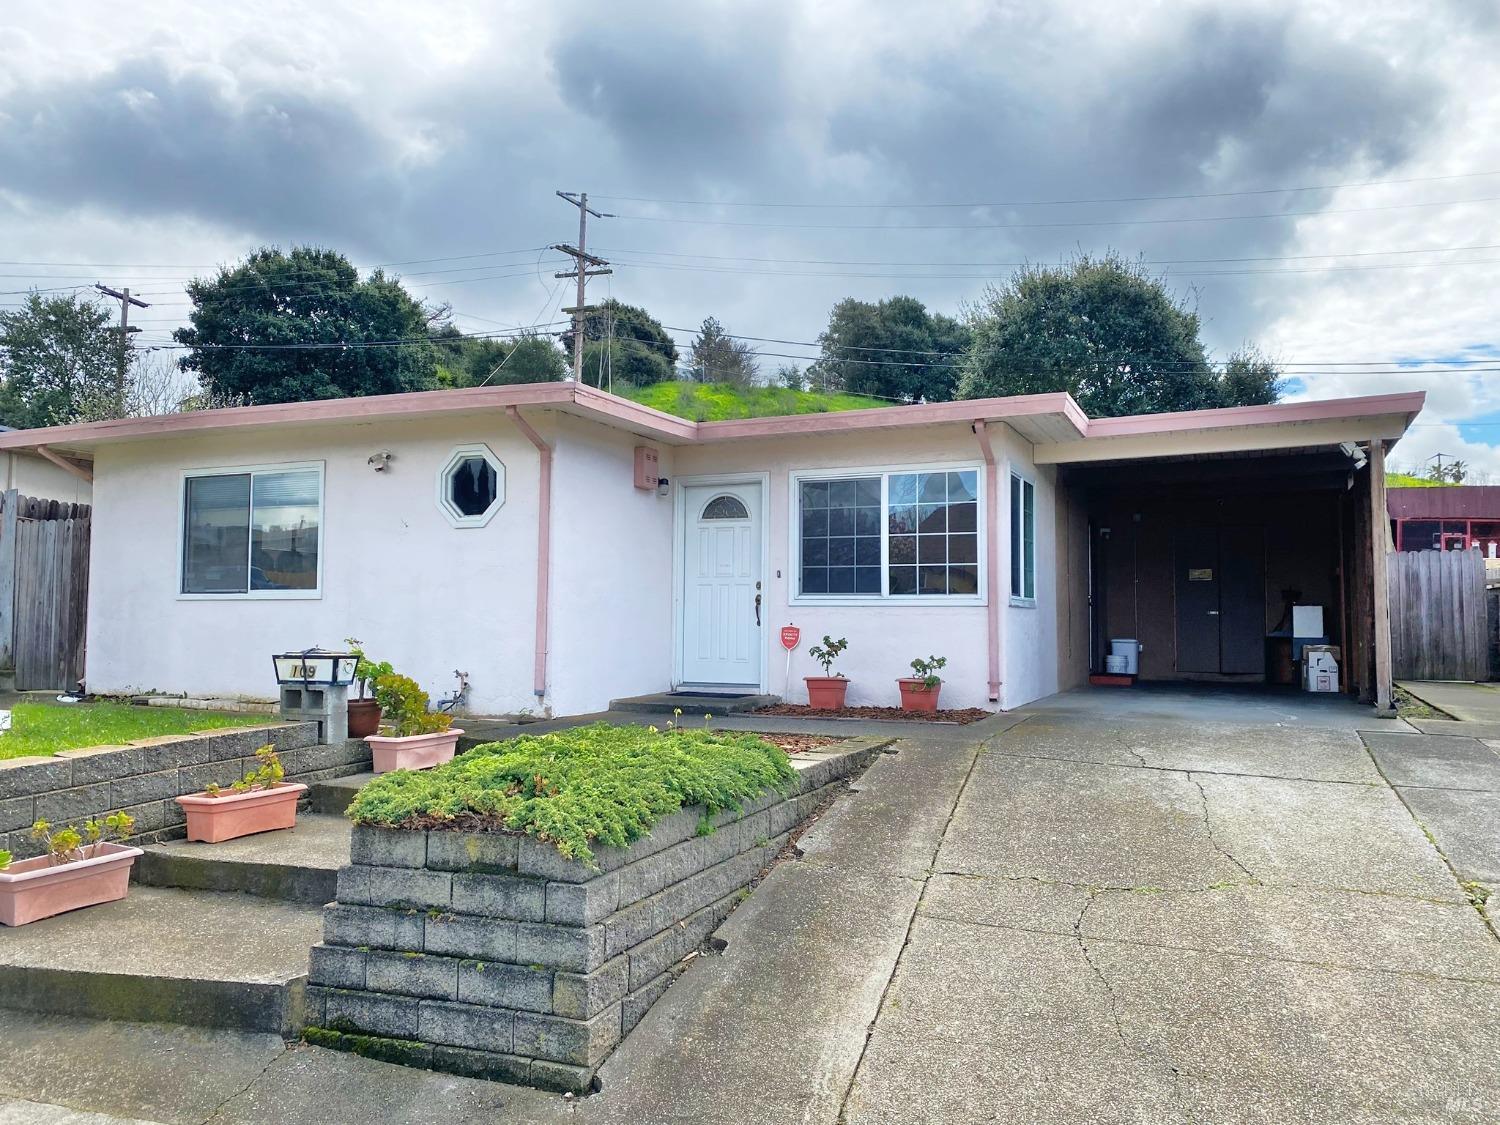 Opportunity knocks! Here's a 3bd/1ba 1-story fixer-upper home with potentially approx 1900sf of livi